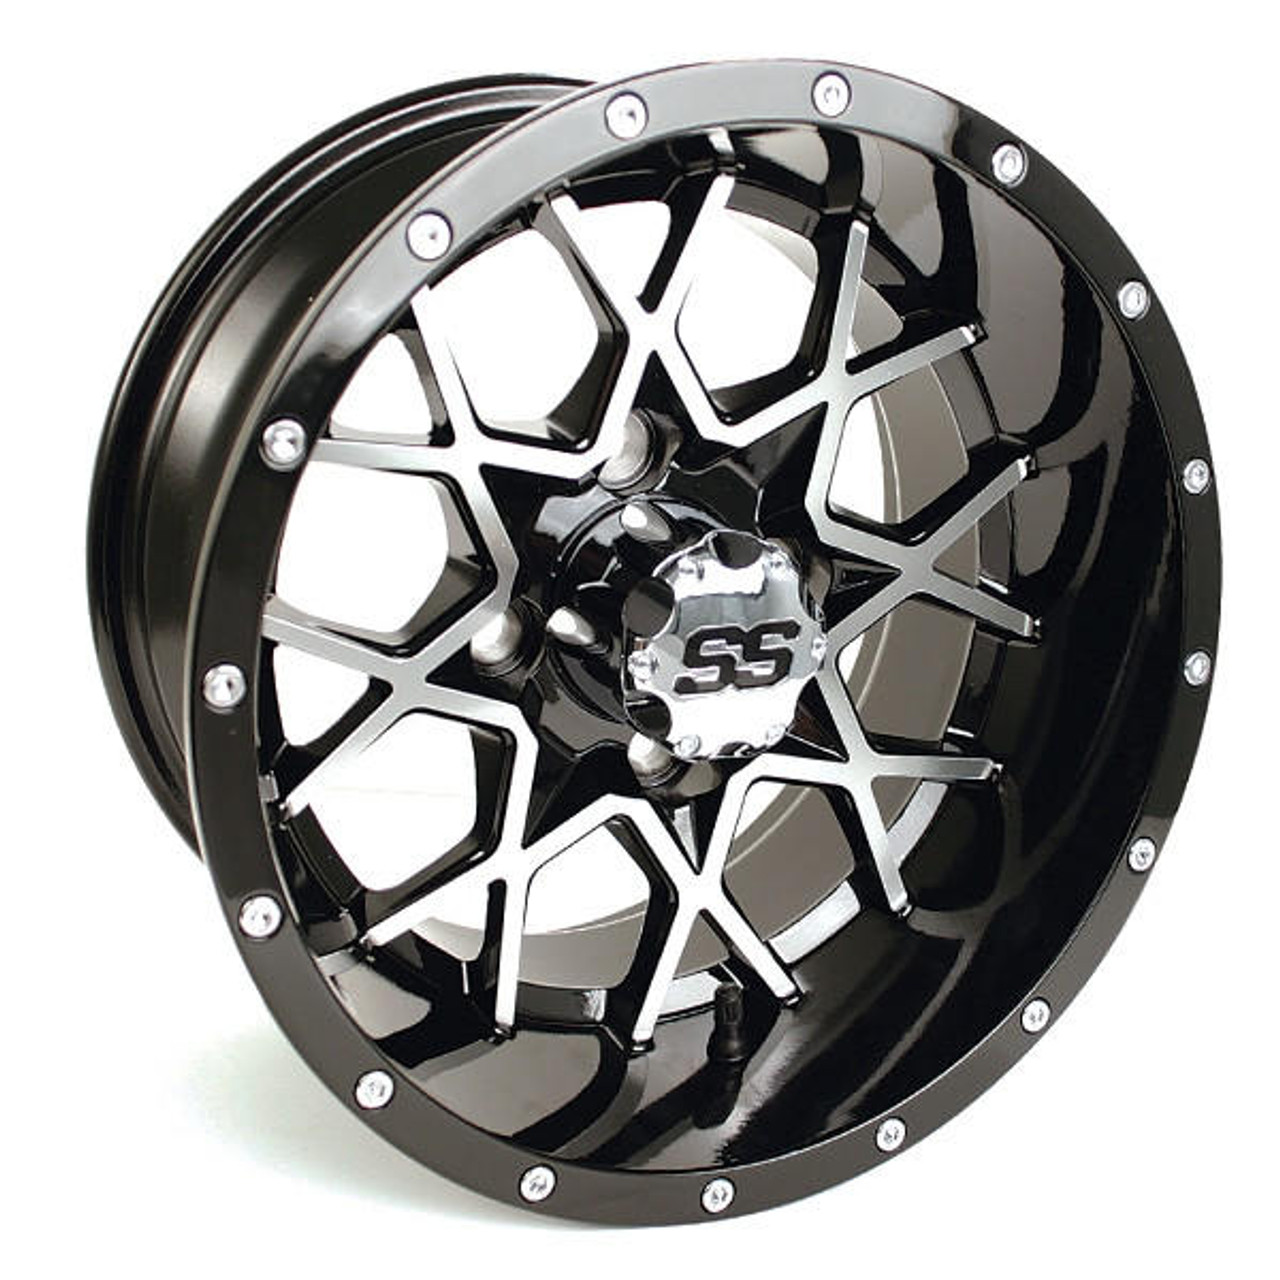  GTW 12" VORTEX Matte Black/Machined Wheels with Choice of Street Tires (Set of 4) 